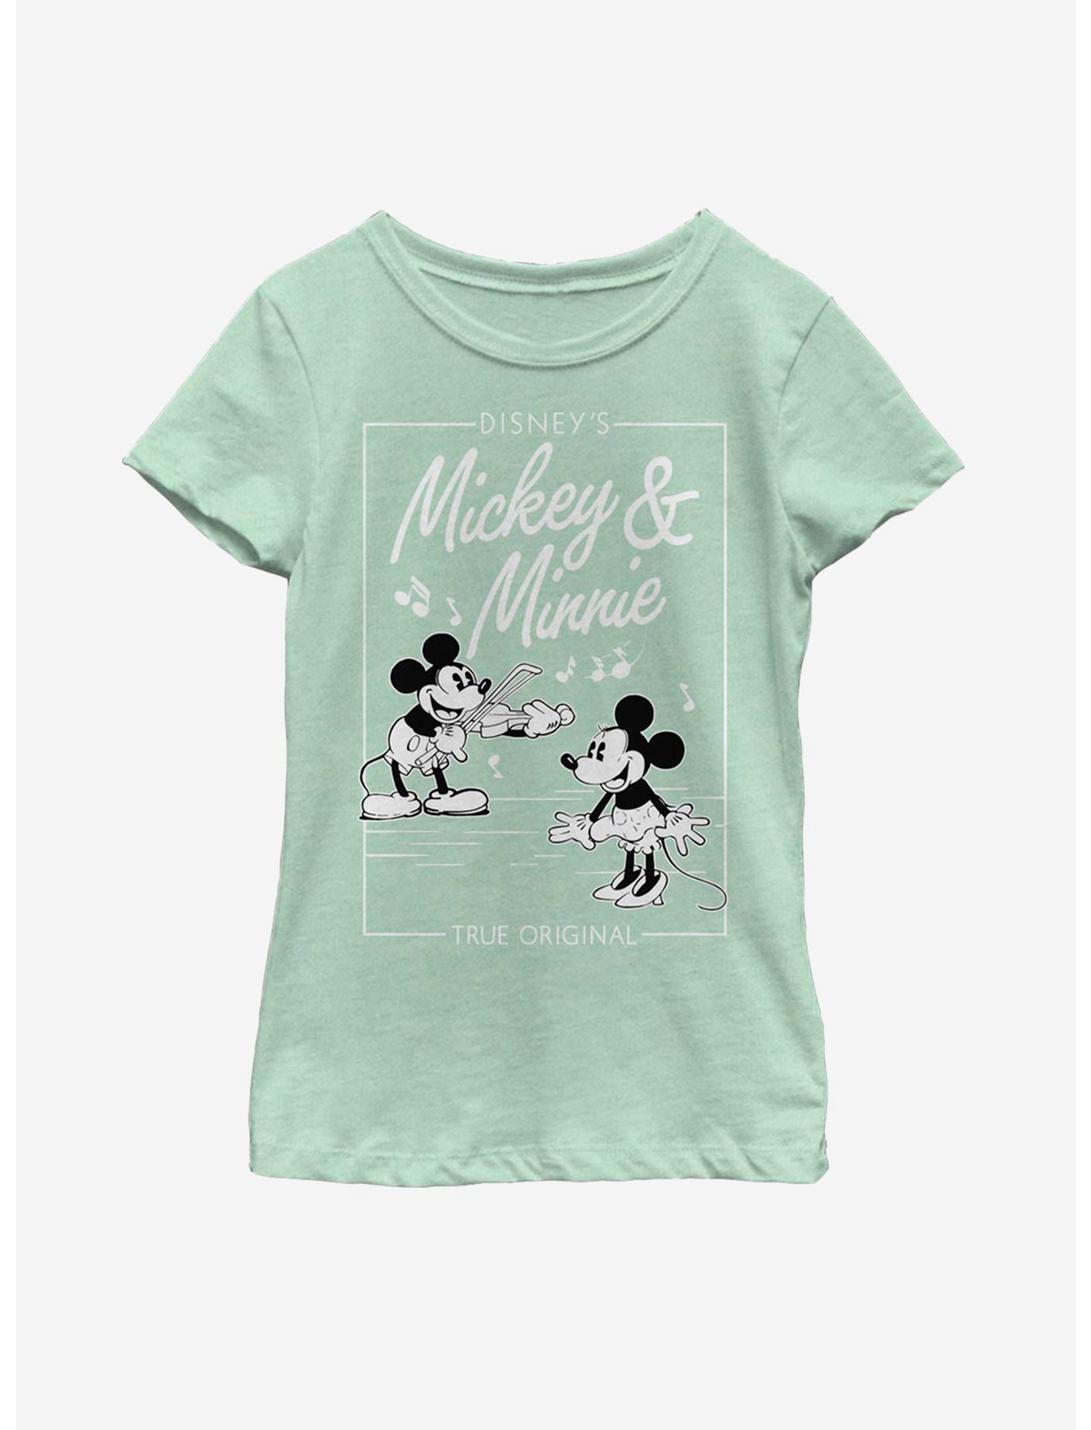 Disney Mickey Mouse Mickey Minnie Music Cover Youth Girls T-Shirt, MINT, hi-res